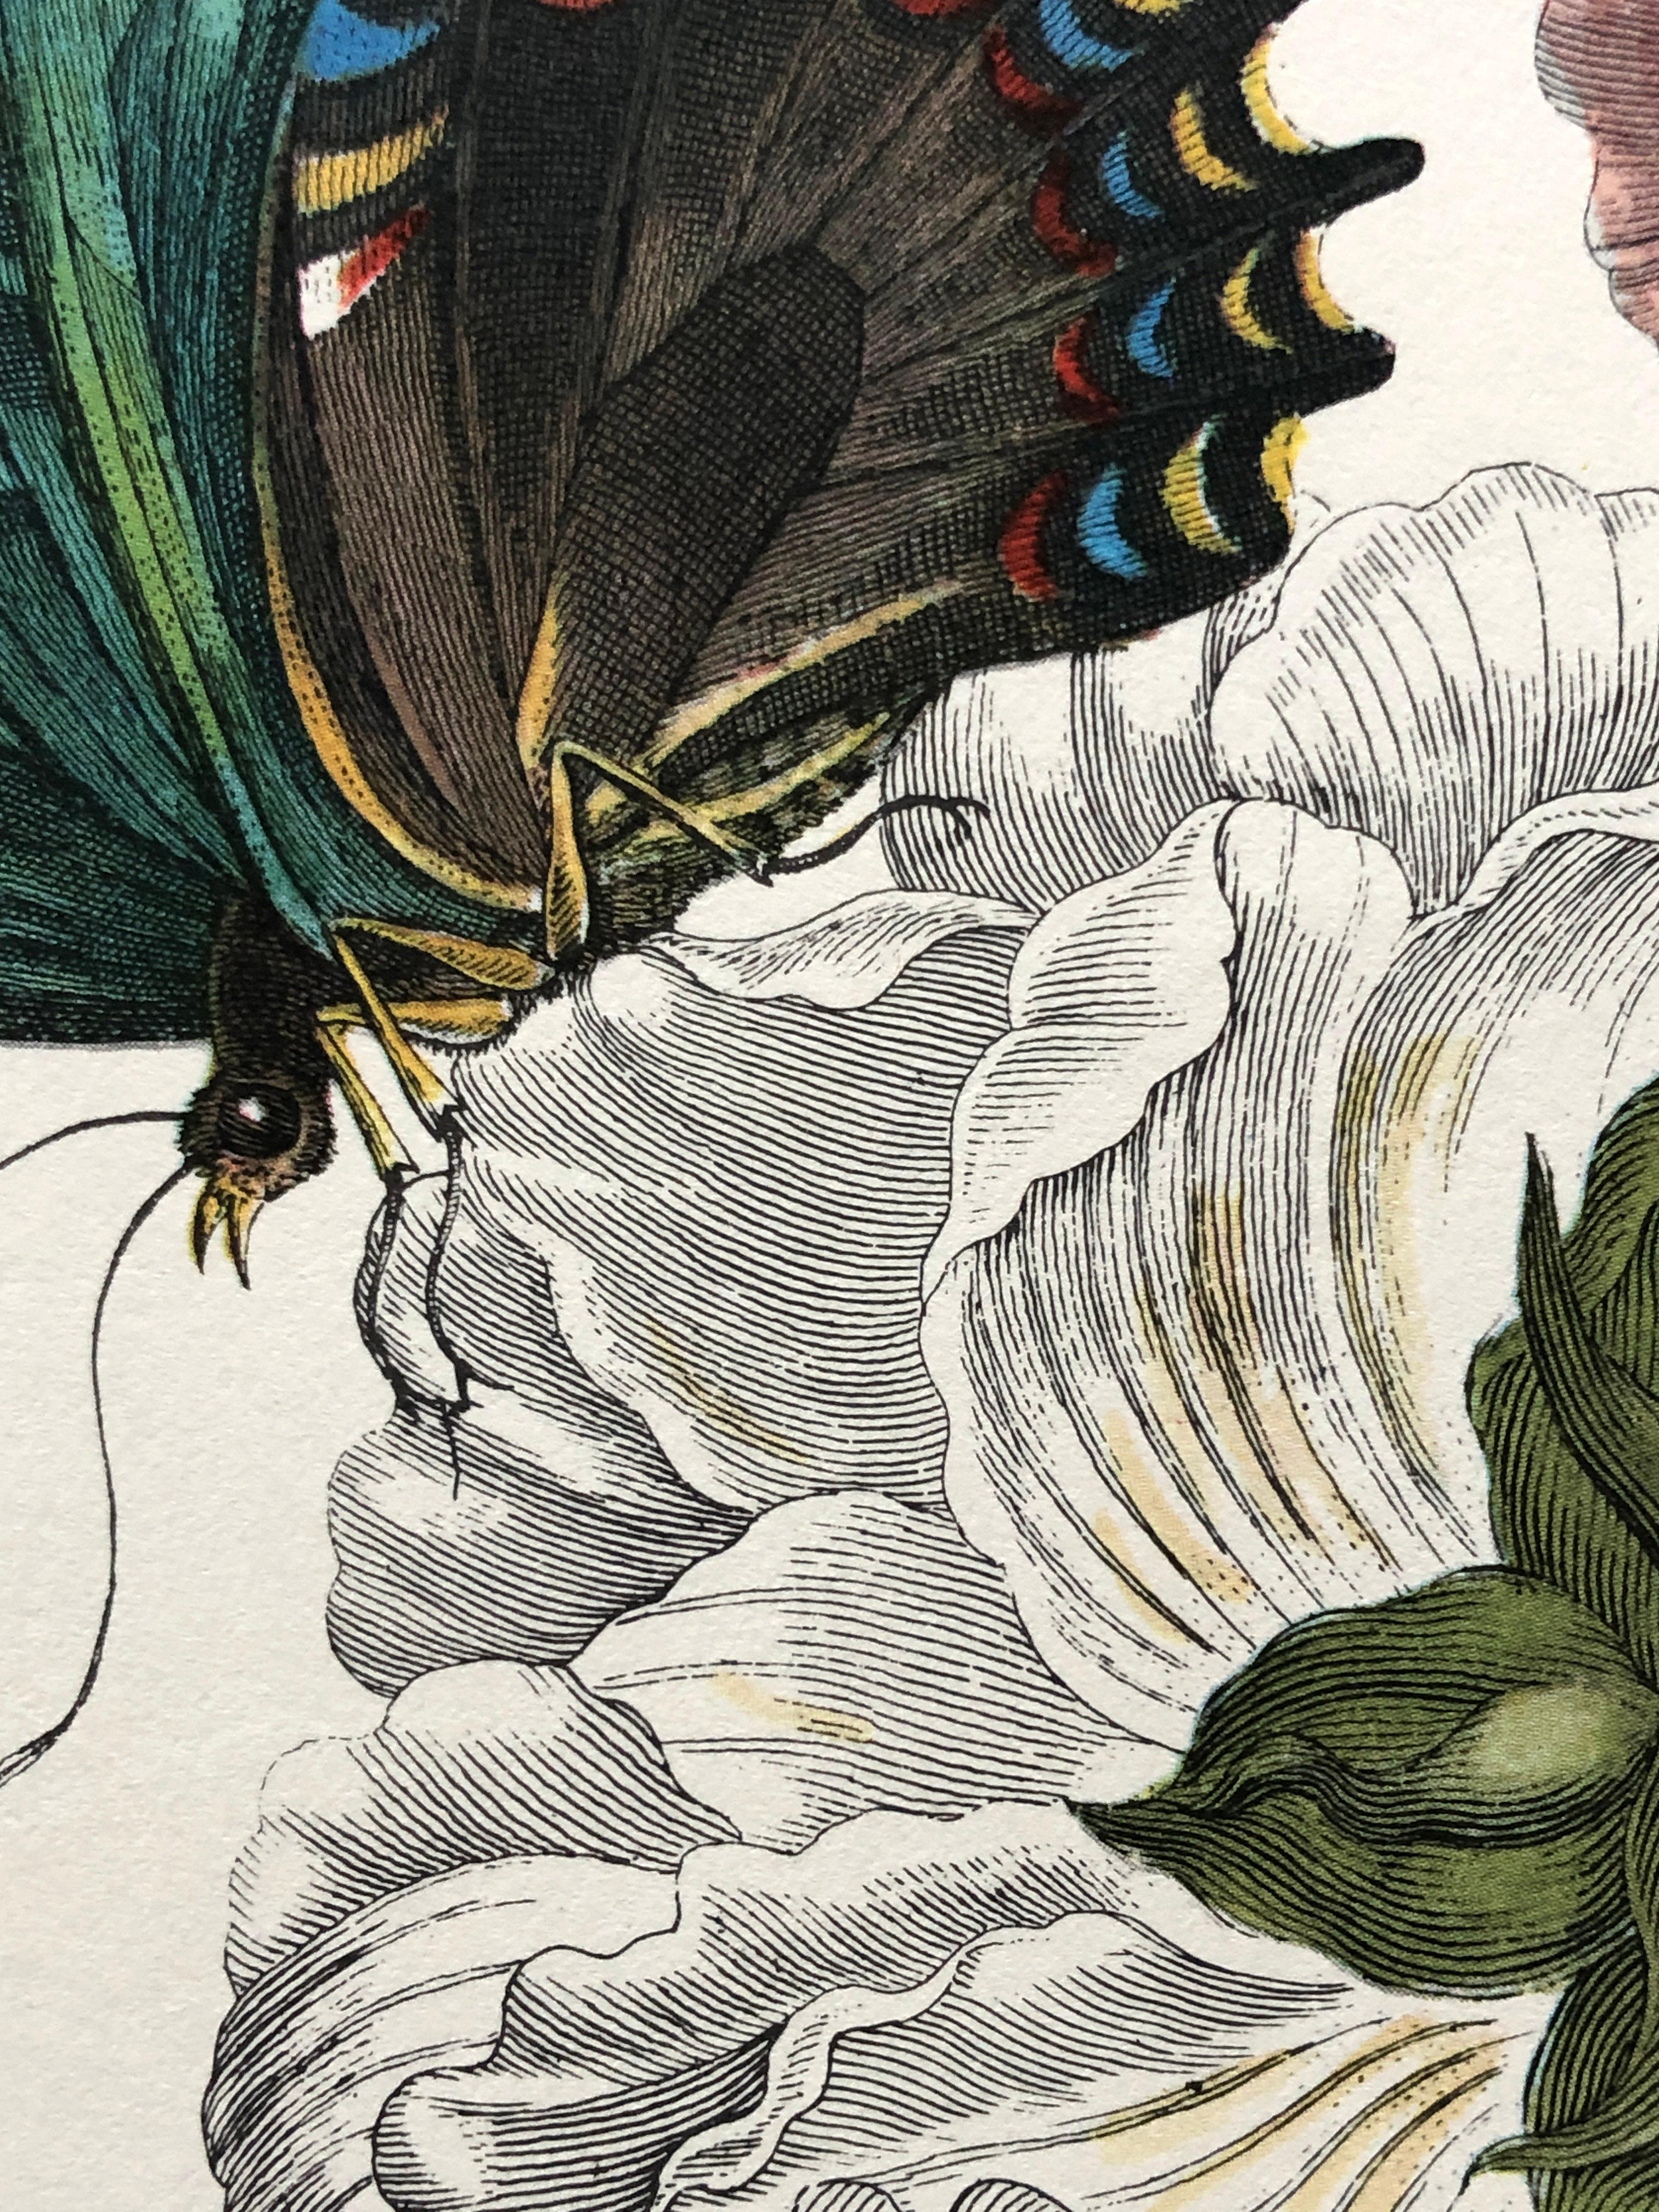 Dutch Maria Sibylla Merian - P. Sluyter - Hibiscus flowers and swallowtail Nr. 31 For Sale